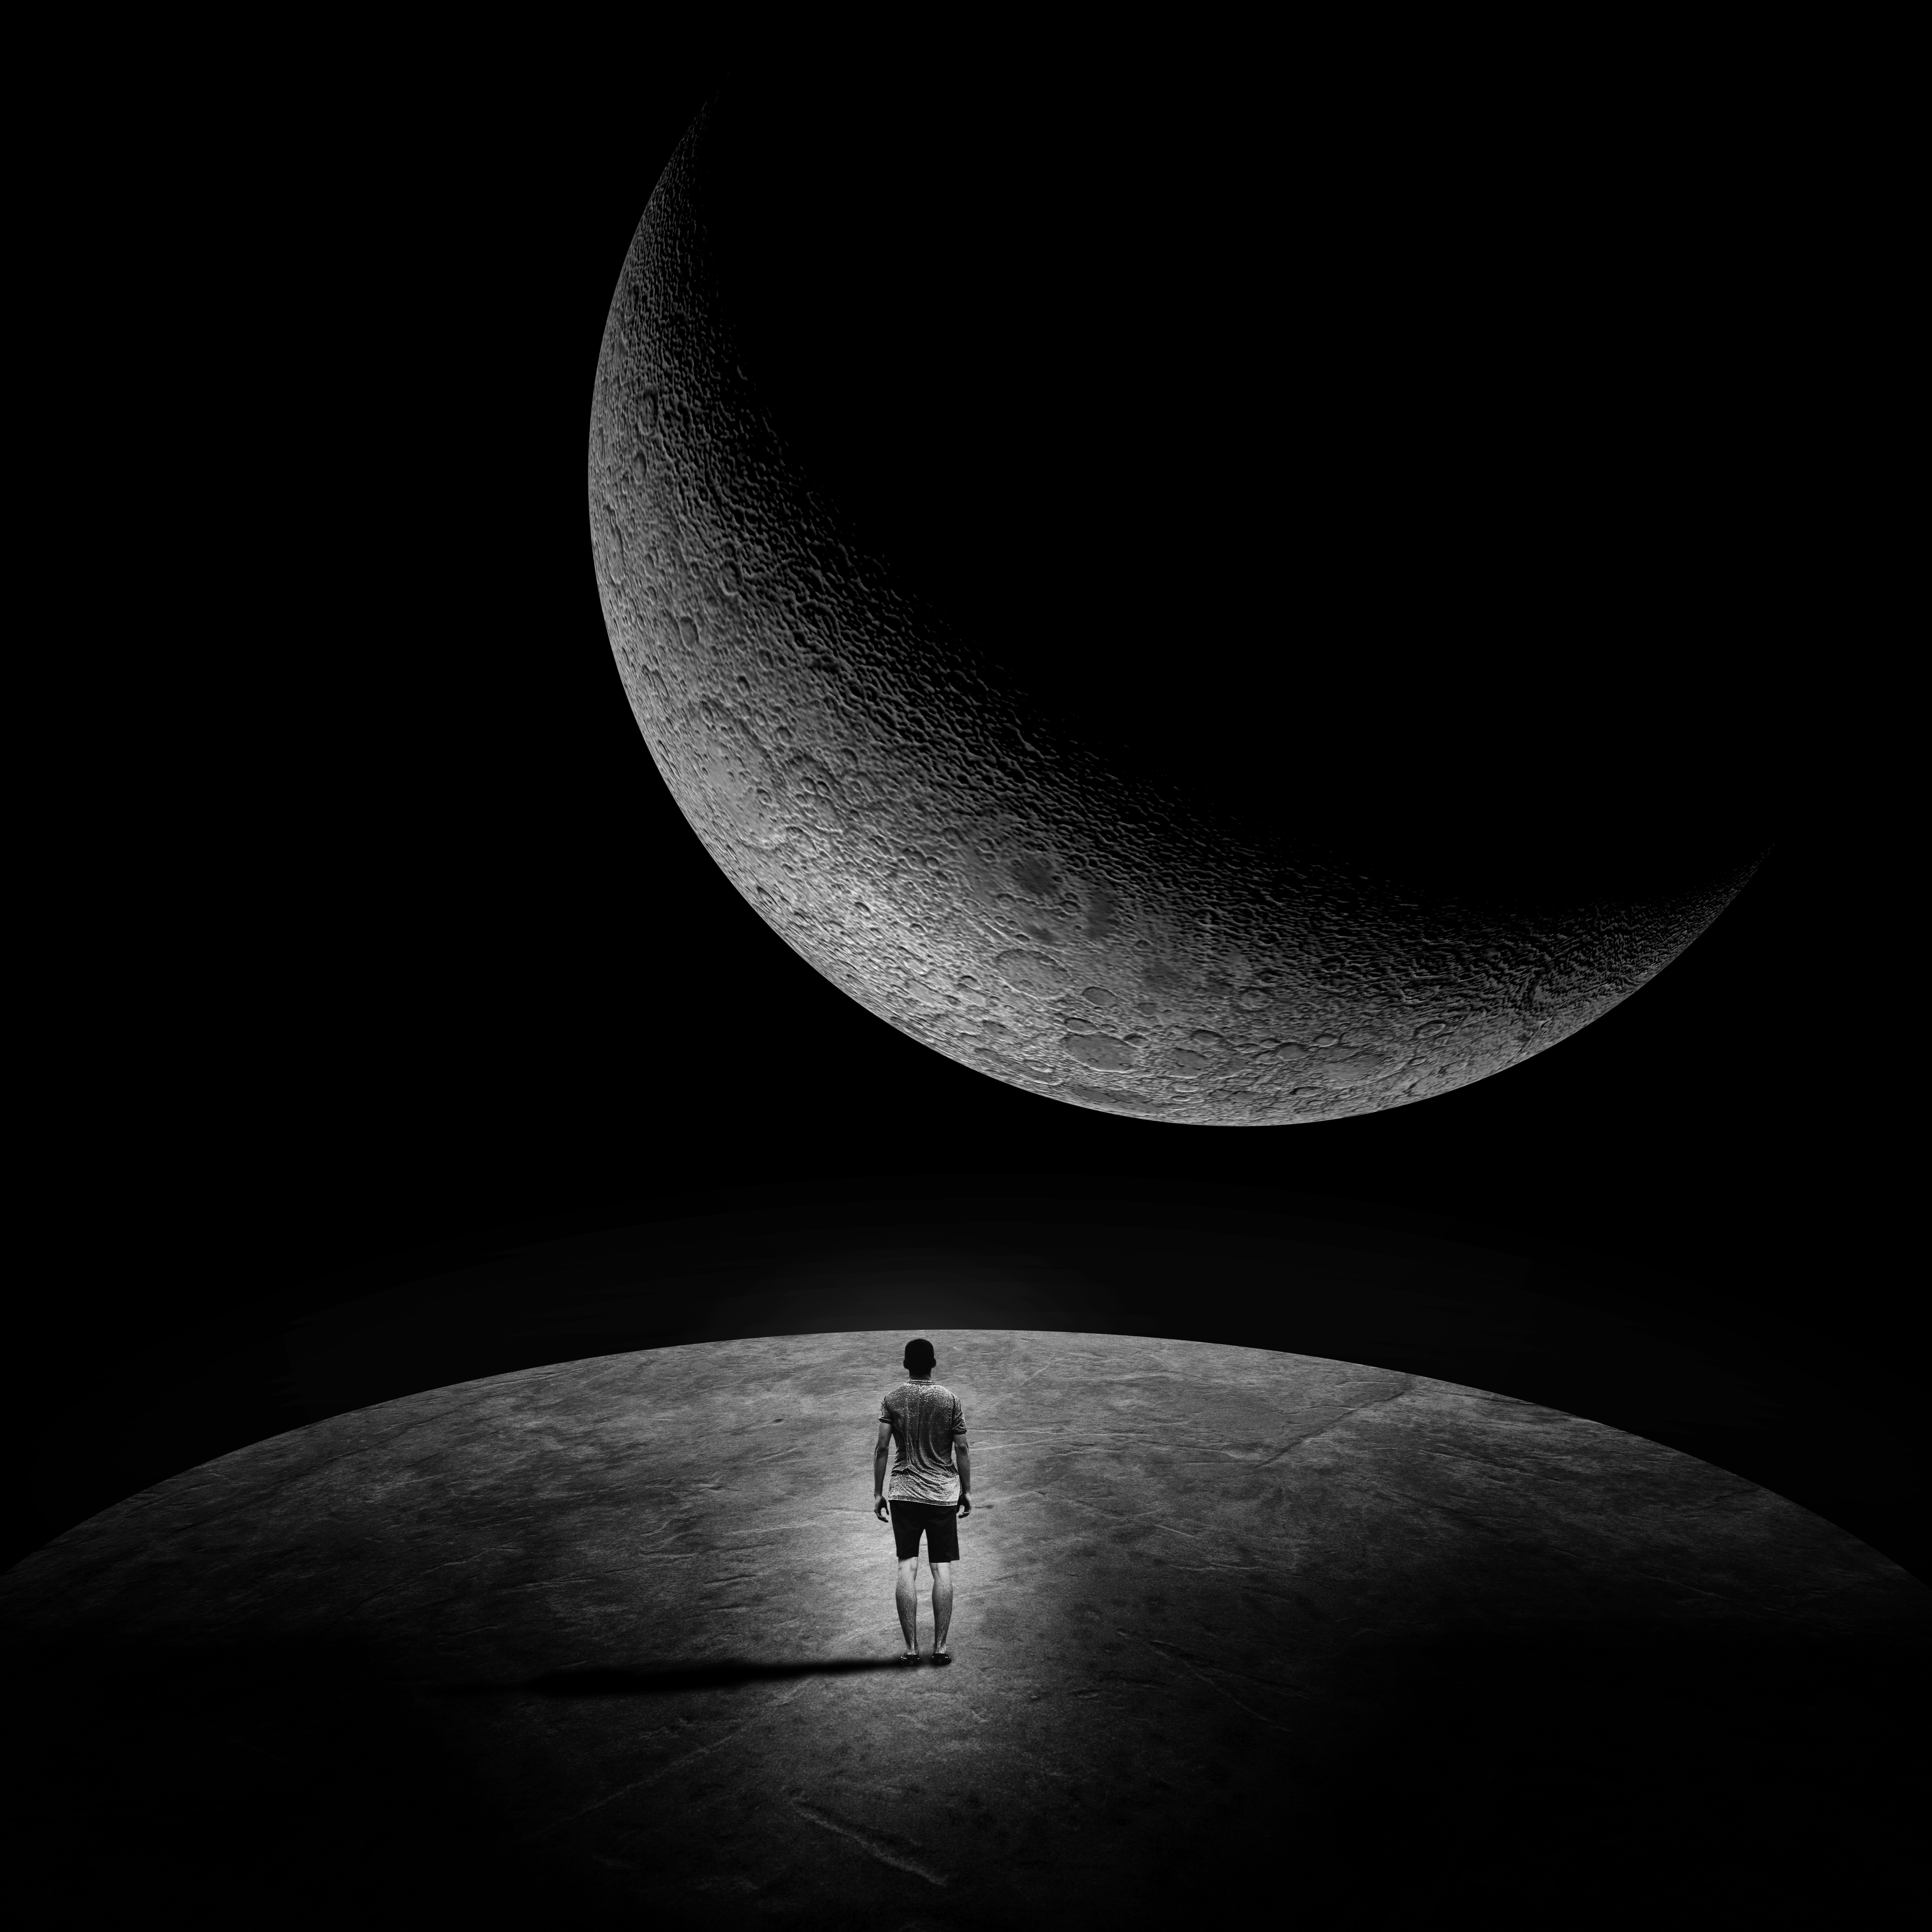 black and white, loneliness, human, space, moon, cosmic, black, dark, extraterrestrial, person